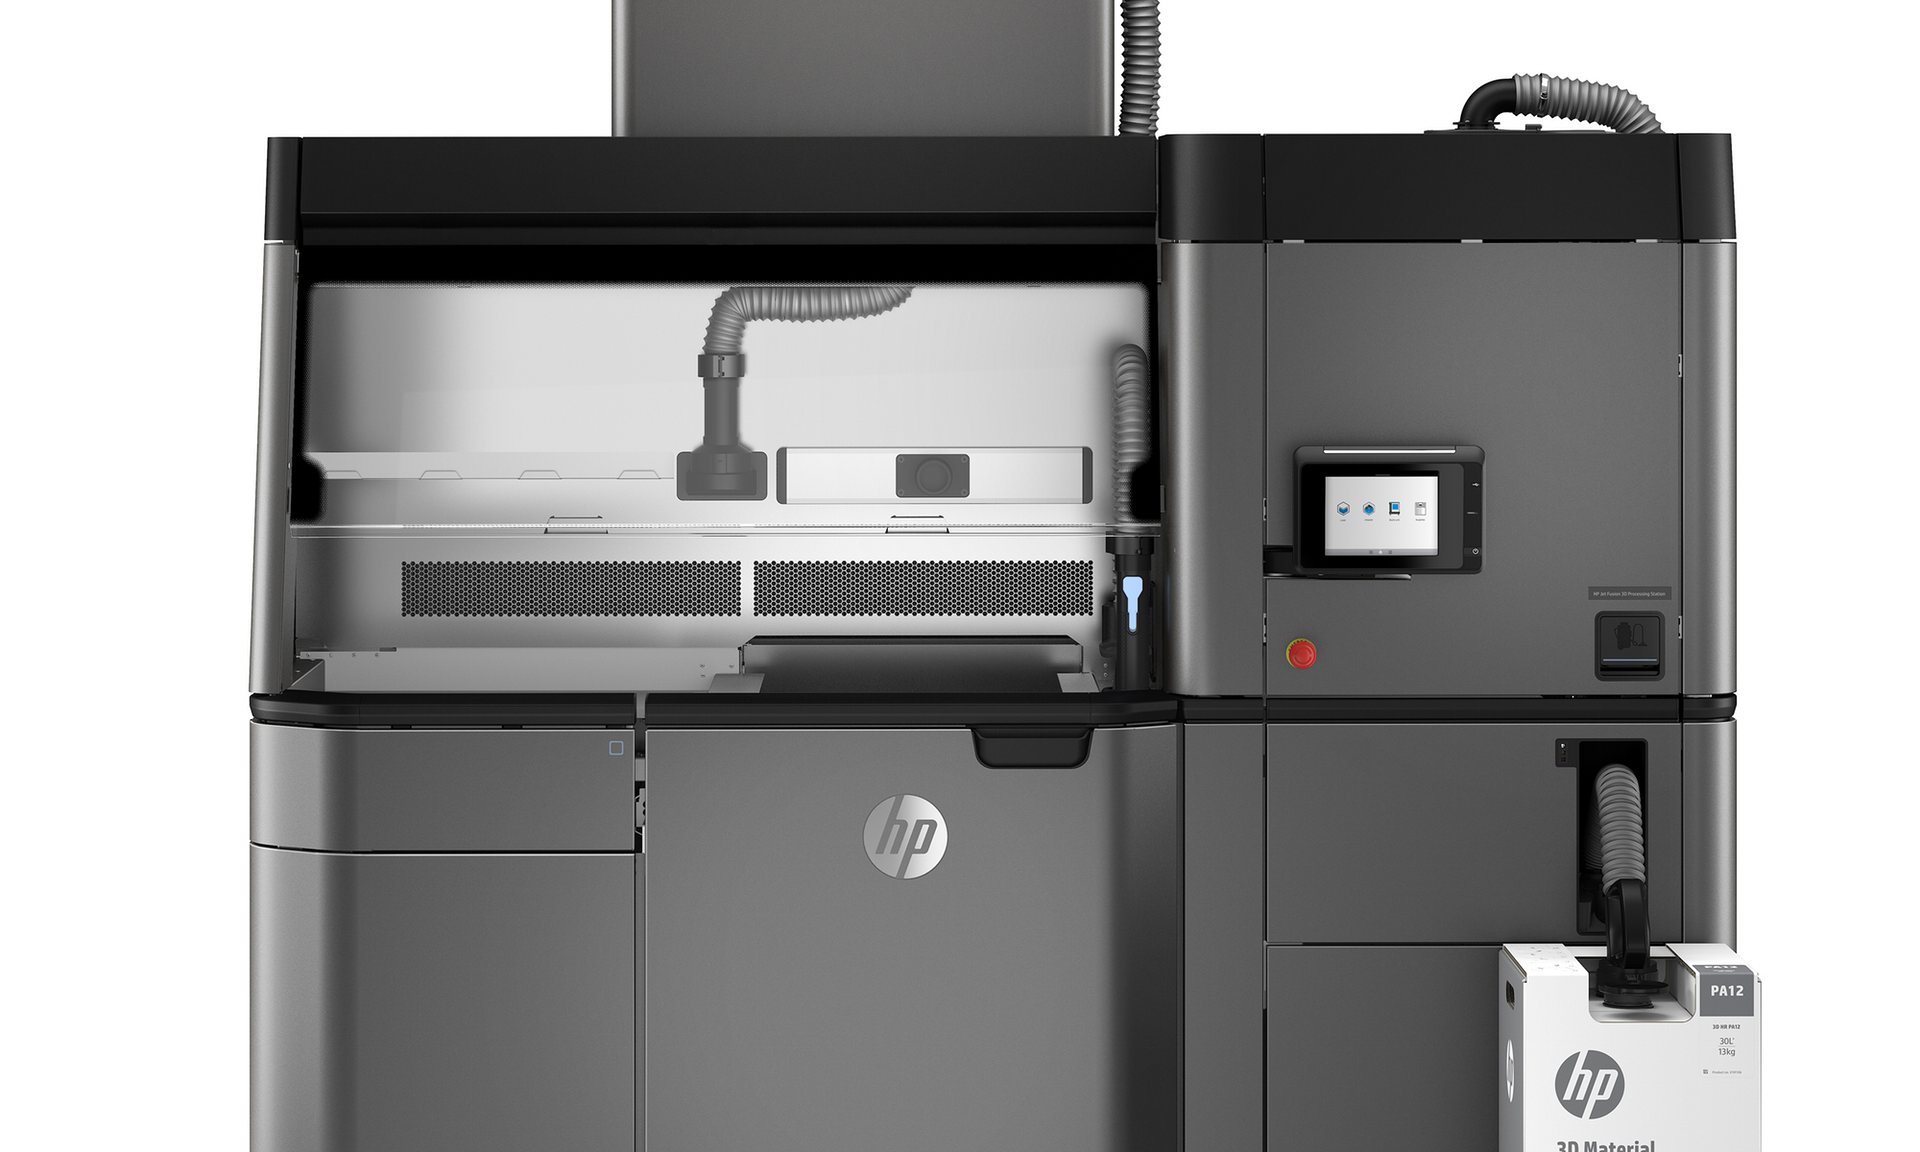  The HP 3200 industrial 3D printer 